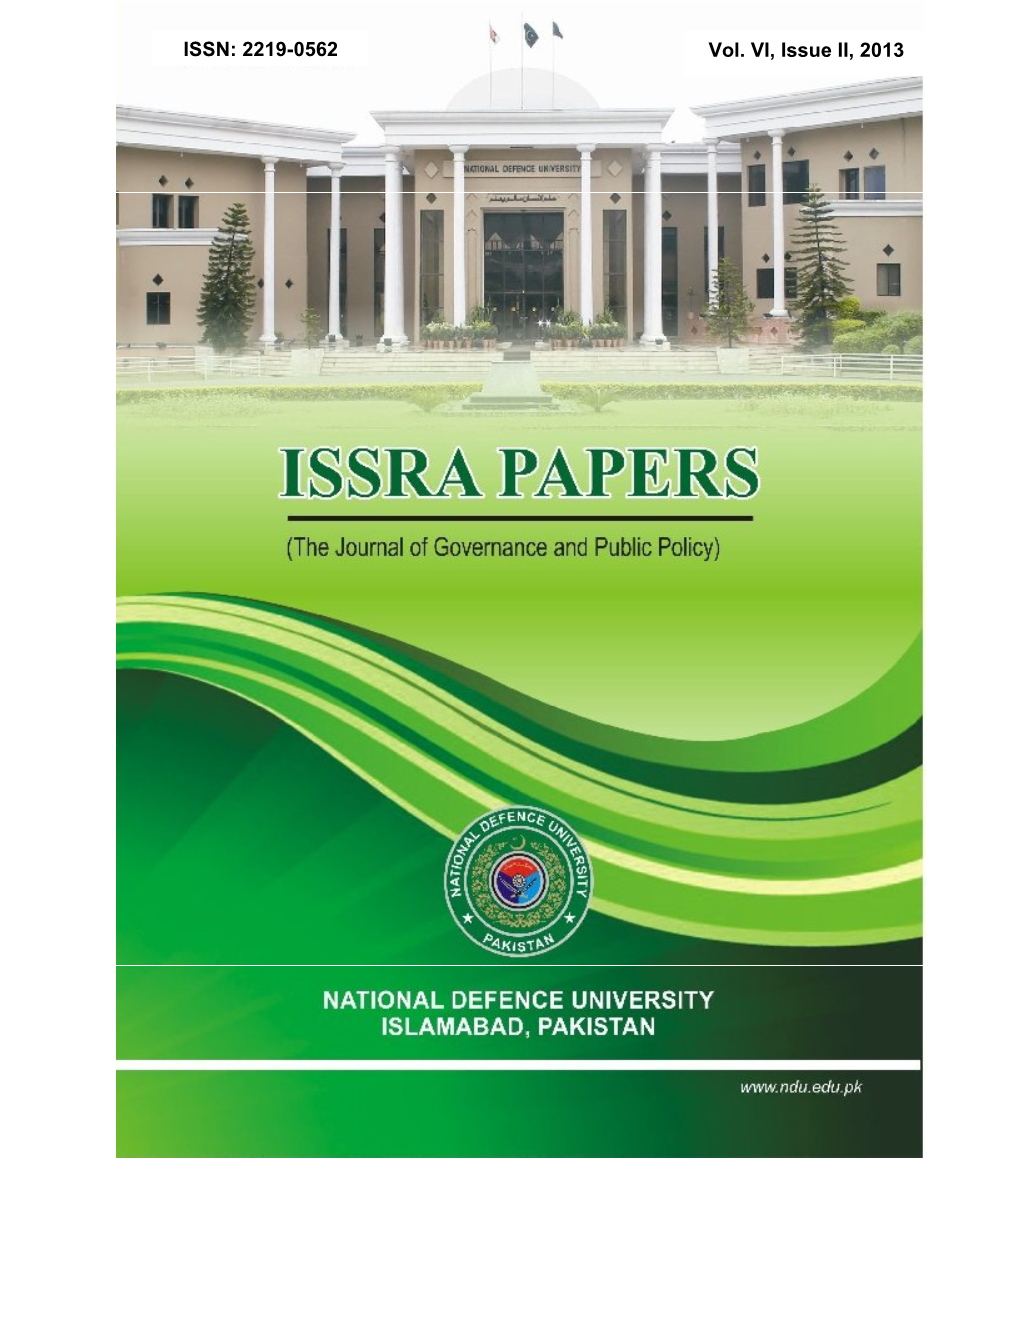 ISSN: 2219-0562 Vol. VI, Issue II, 2013 ISSRA PAPERS Institute for Strategic Studies, Research & Analysis (ISSRA) National Defence University, Islamabad